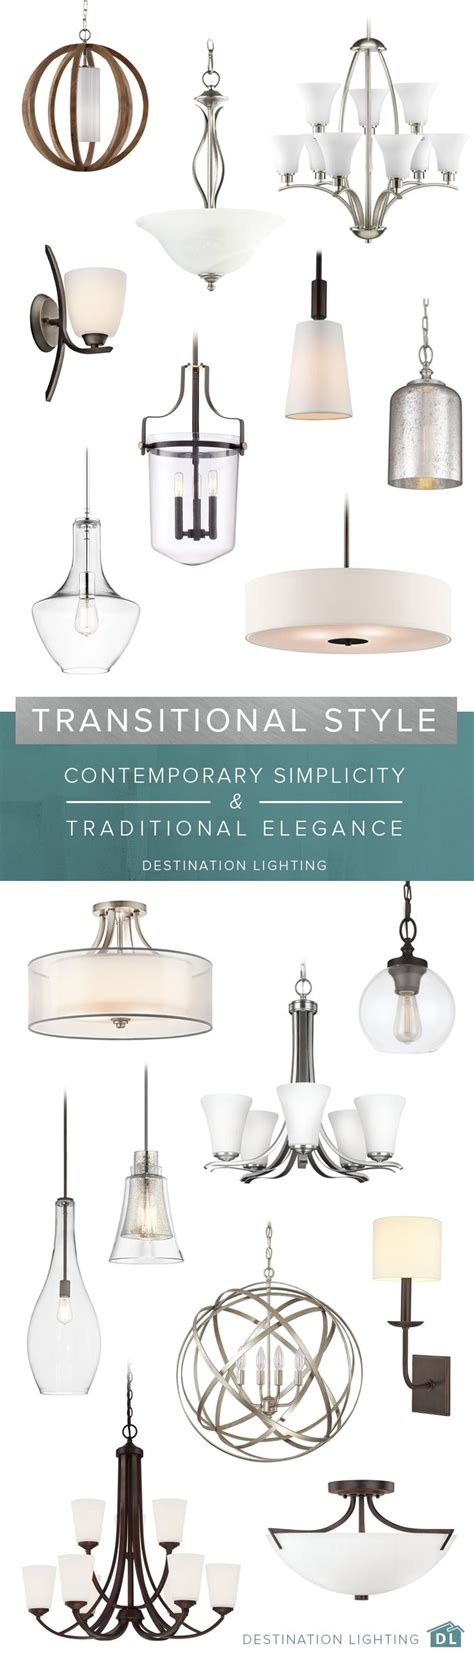 Contemporary Simplicity Meets Traditional Elegance With These Beautiful